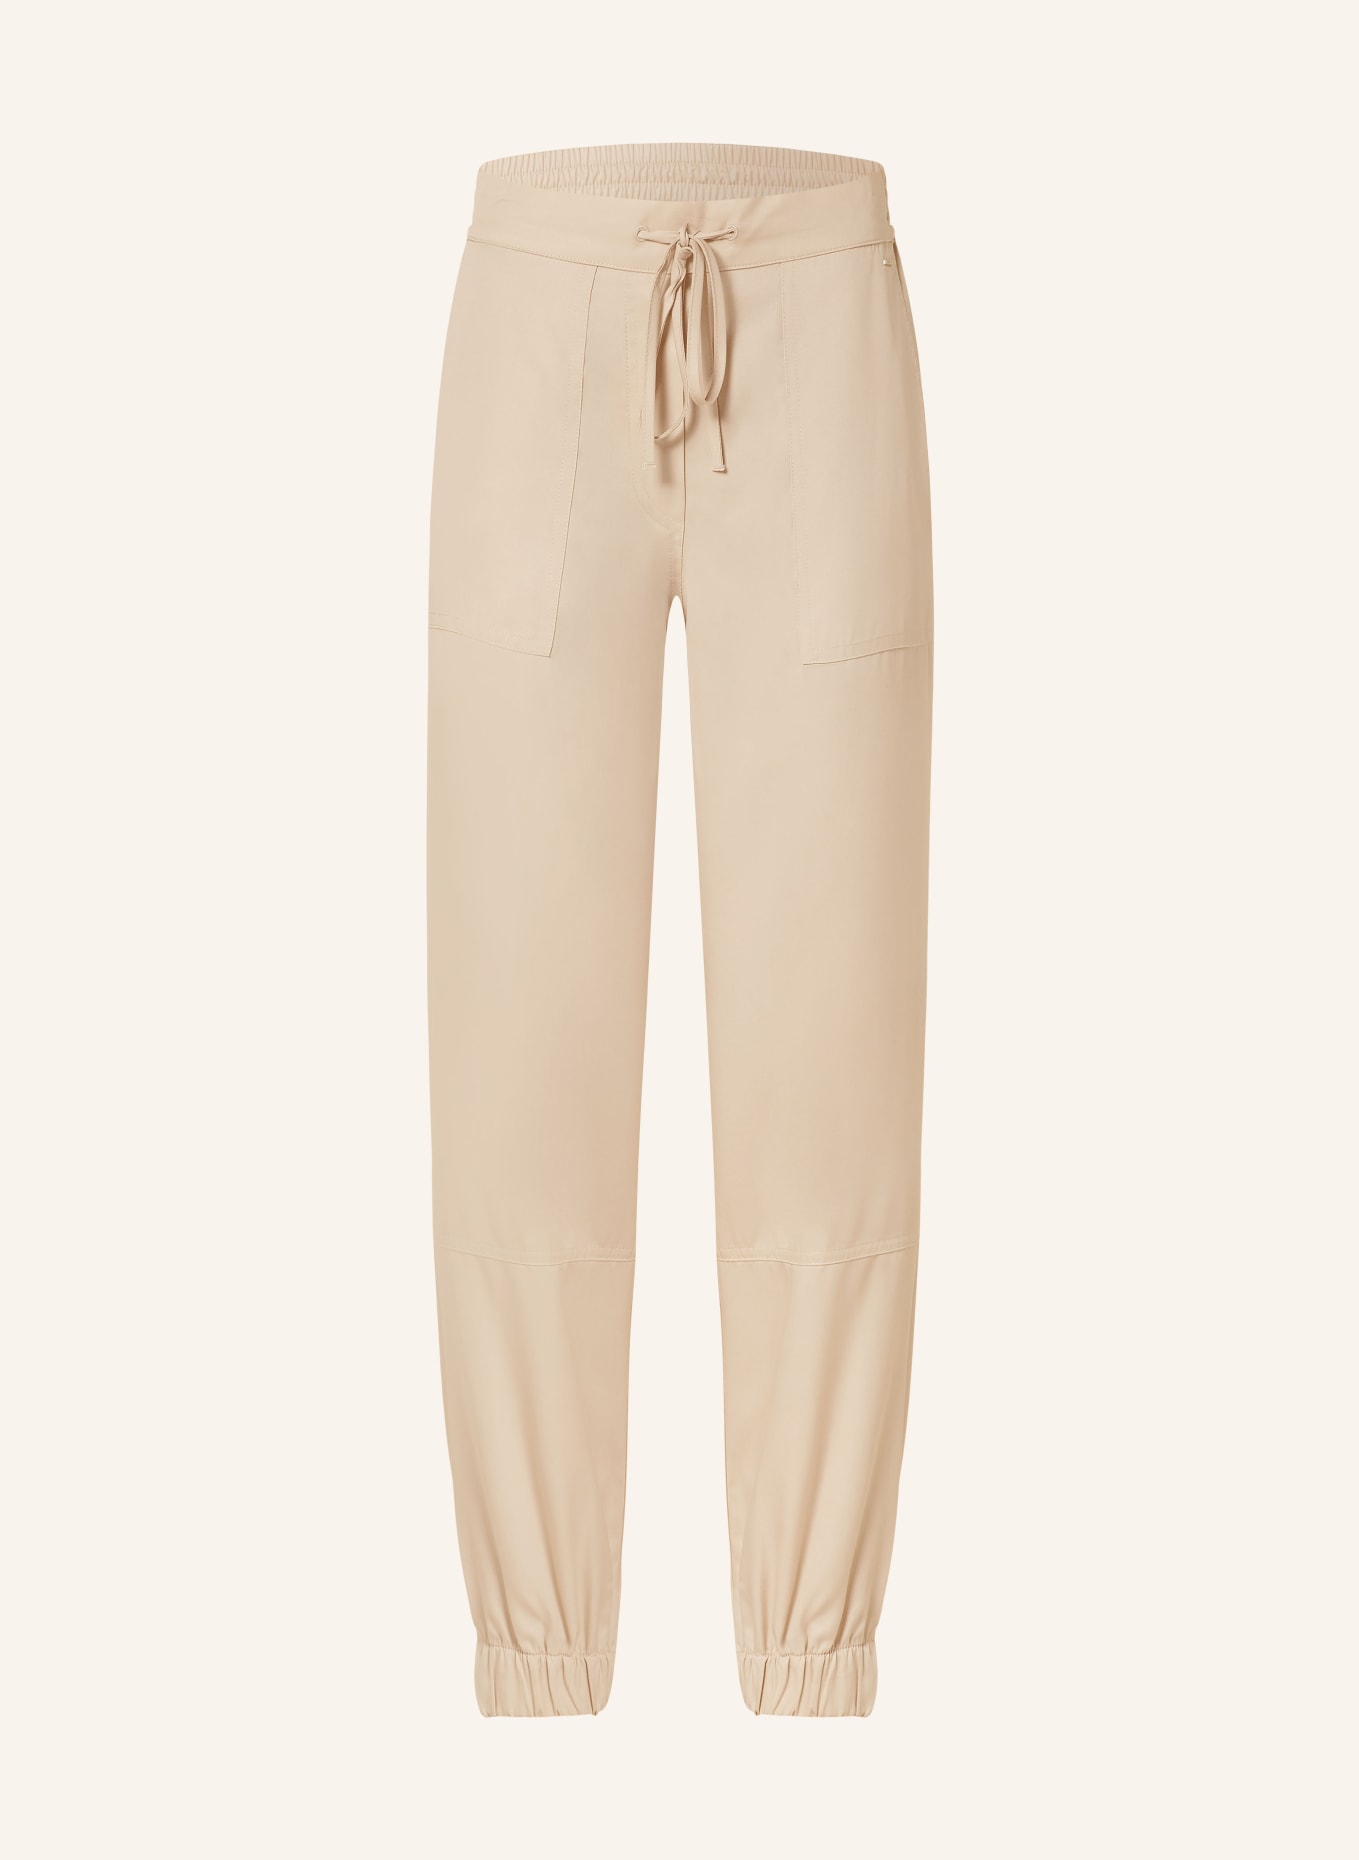 JOOP! Satin pants in jogger style, Color: CREAM (Image 1)